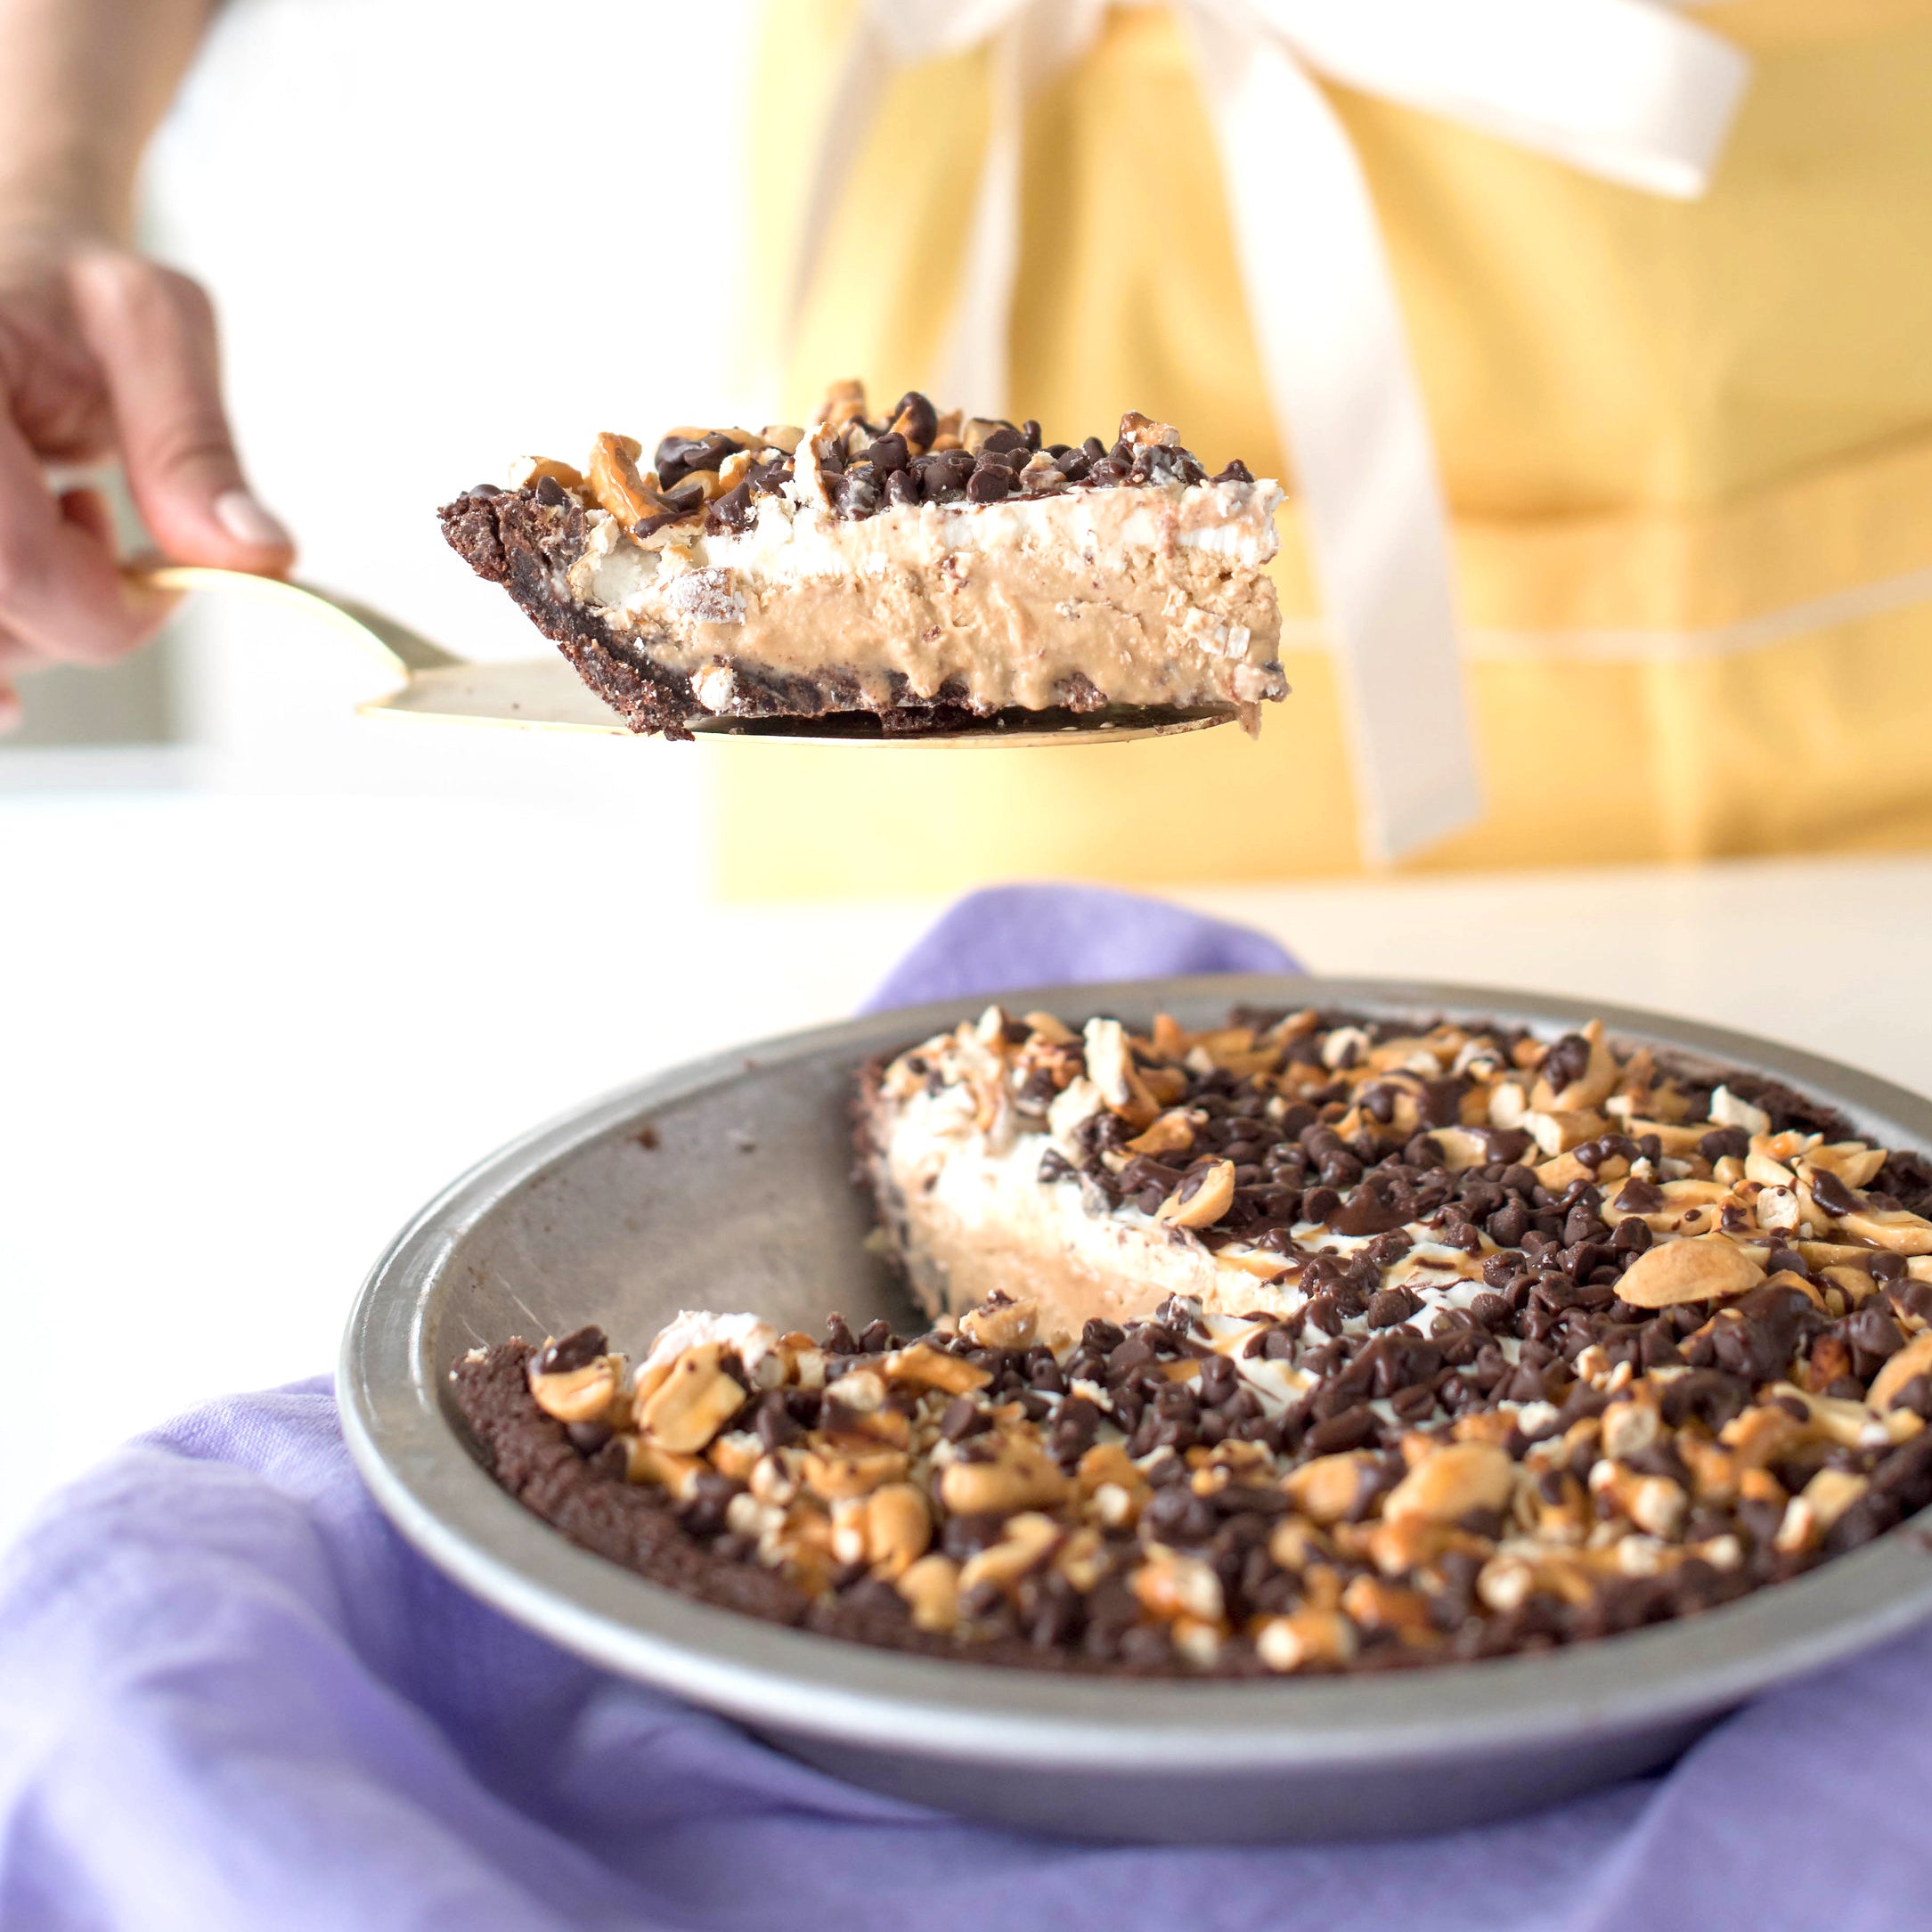 Image of Miss Jones Baking Co Salted Caramel Brownie Pie with a slice taken out of it